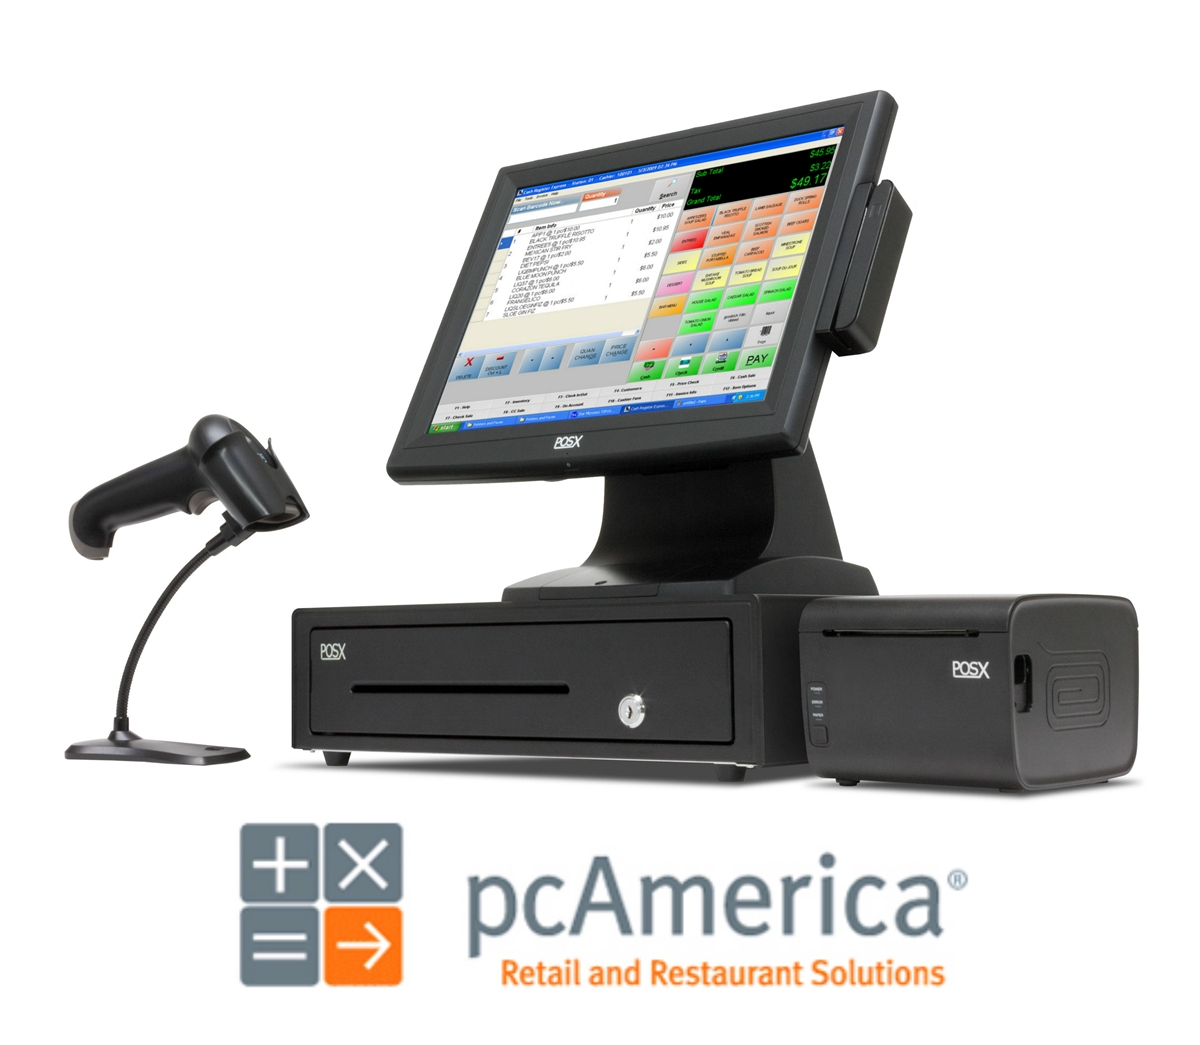 Liquor Store Complete POS System with PC America Cash Register Express Software 